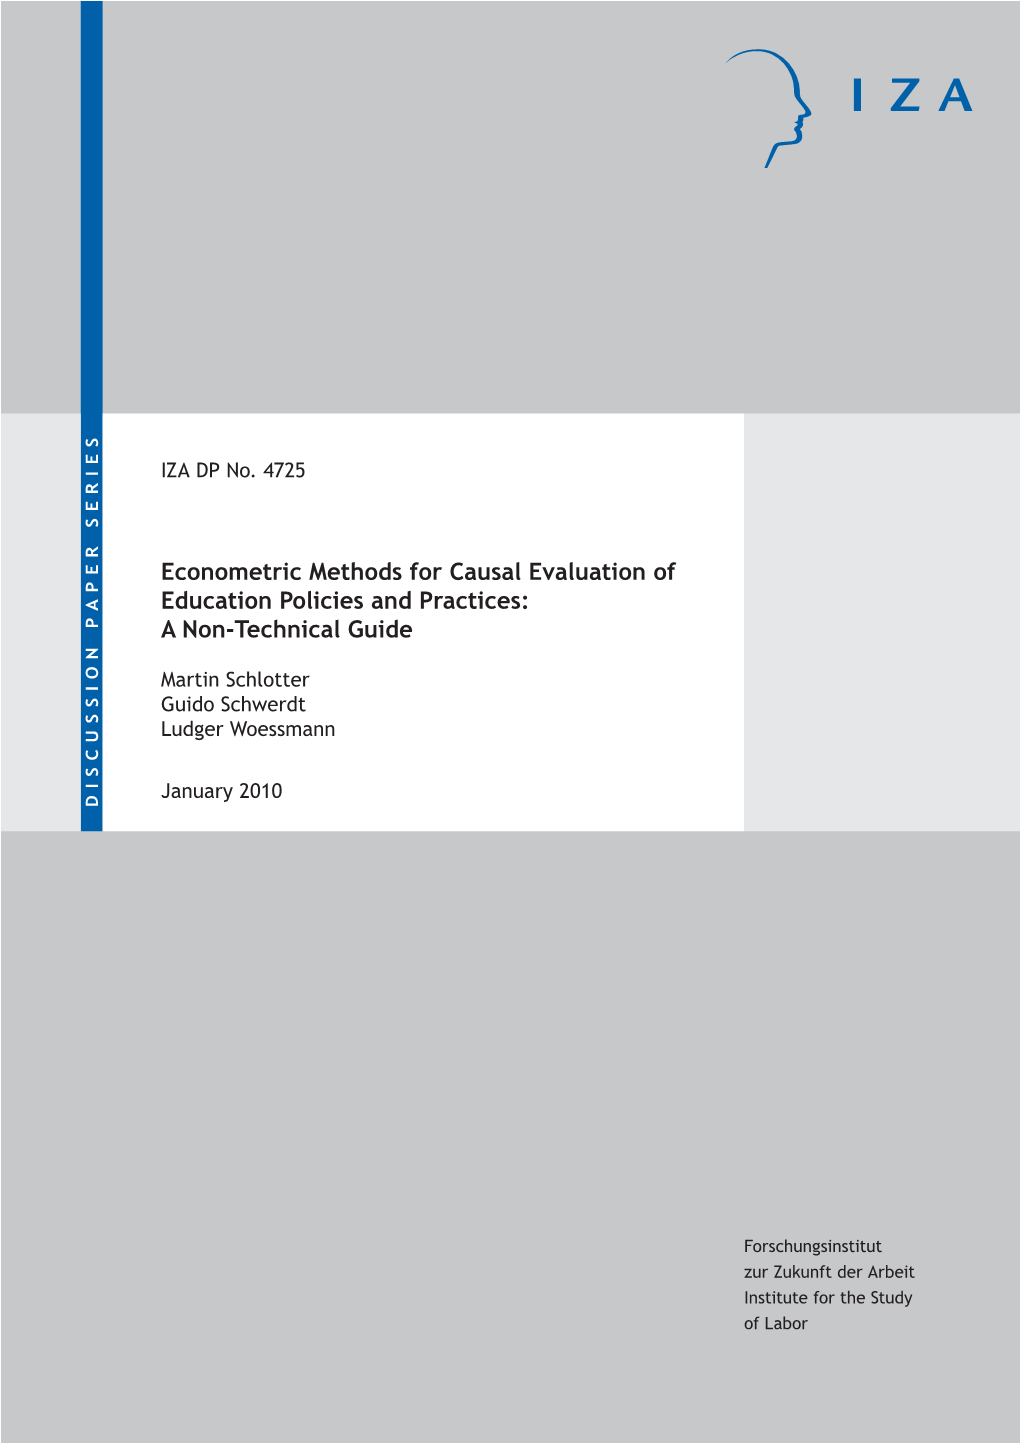 Econometric Methods for Causal Evaluation of Education Policies and Practices: a Non-Technical Guide